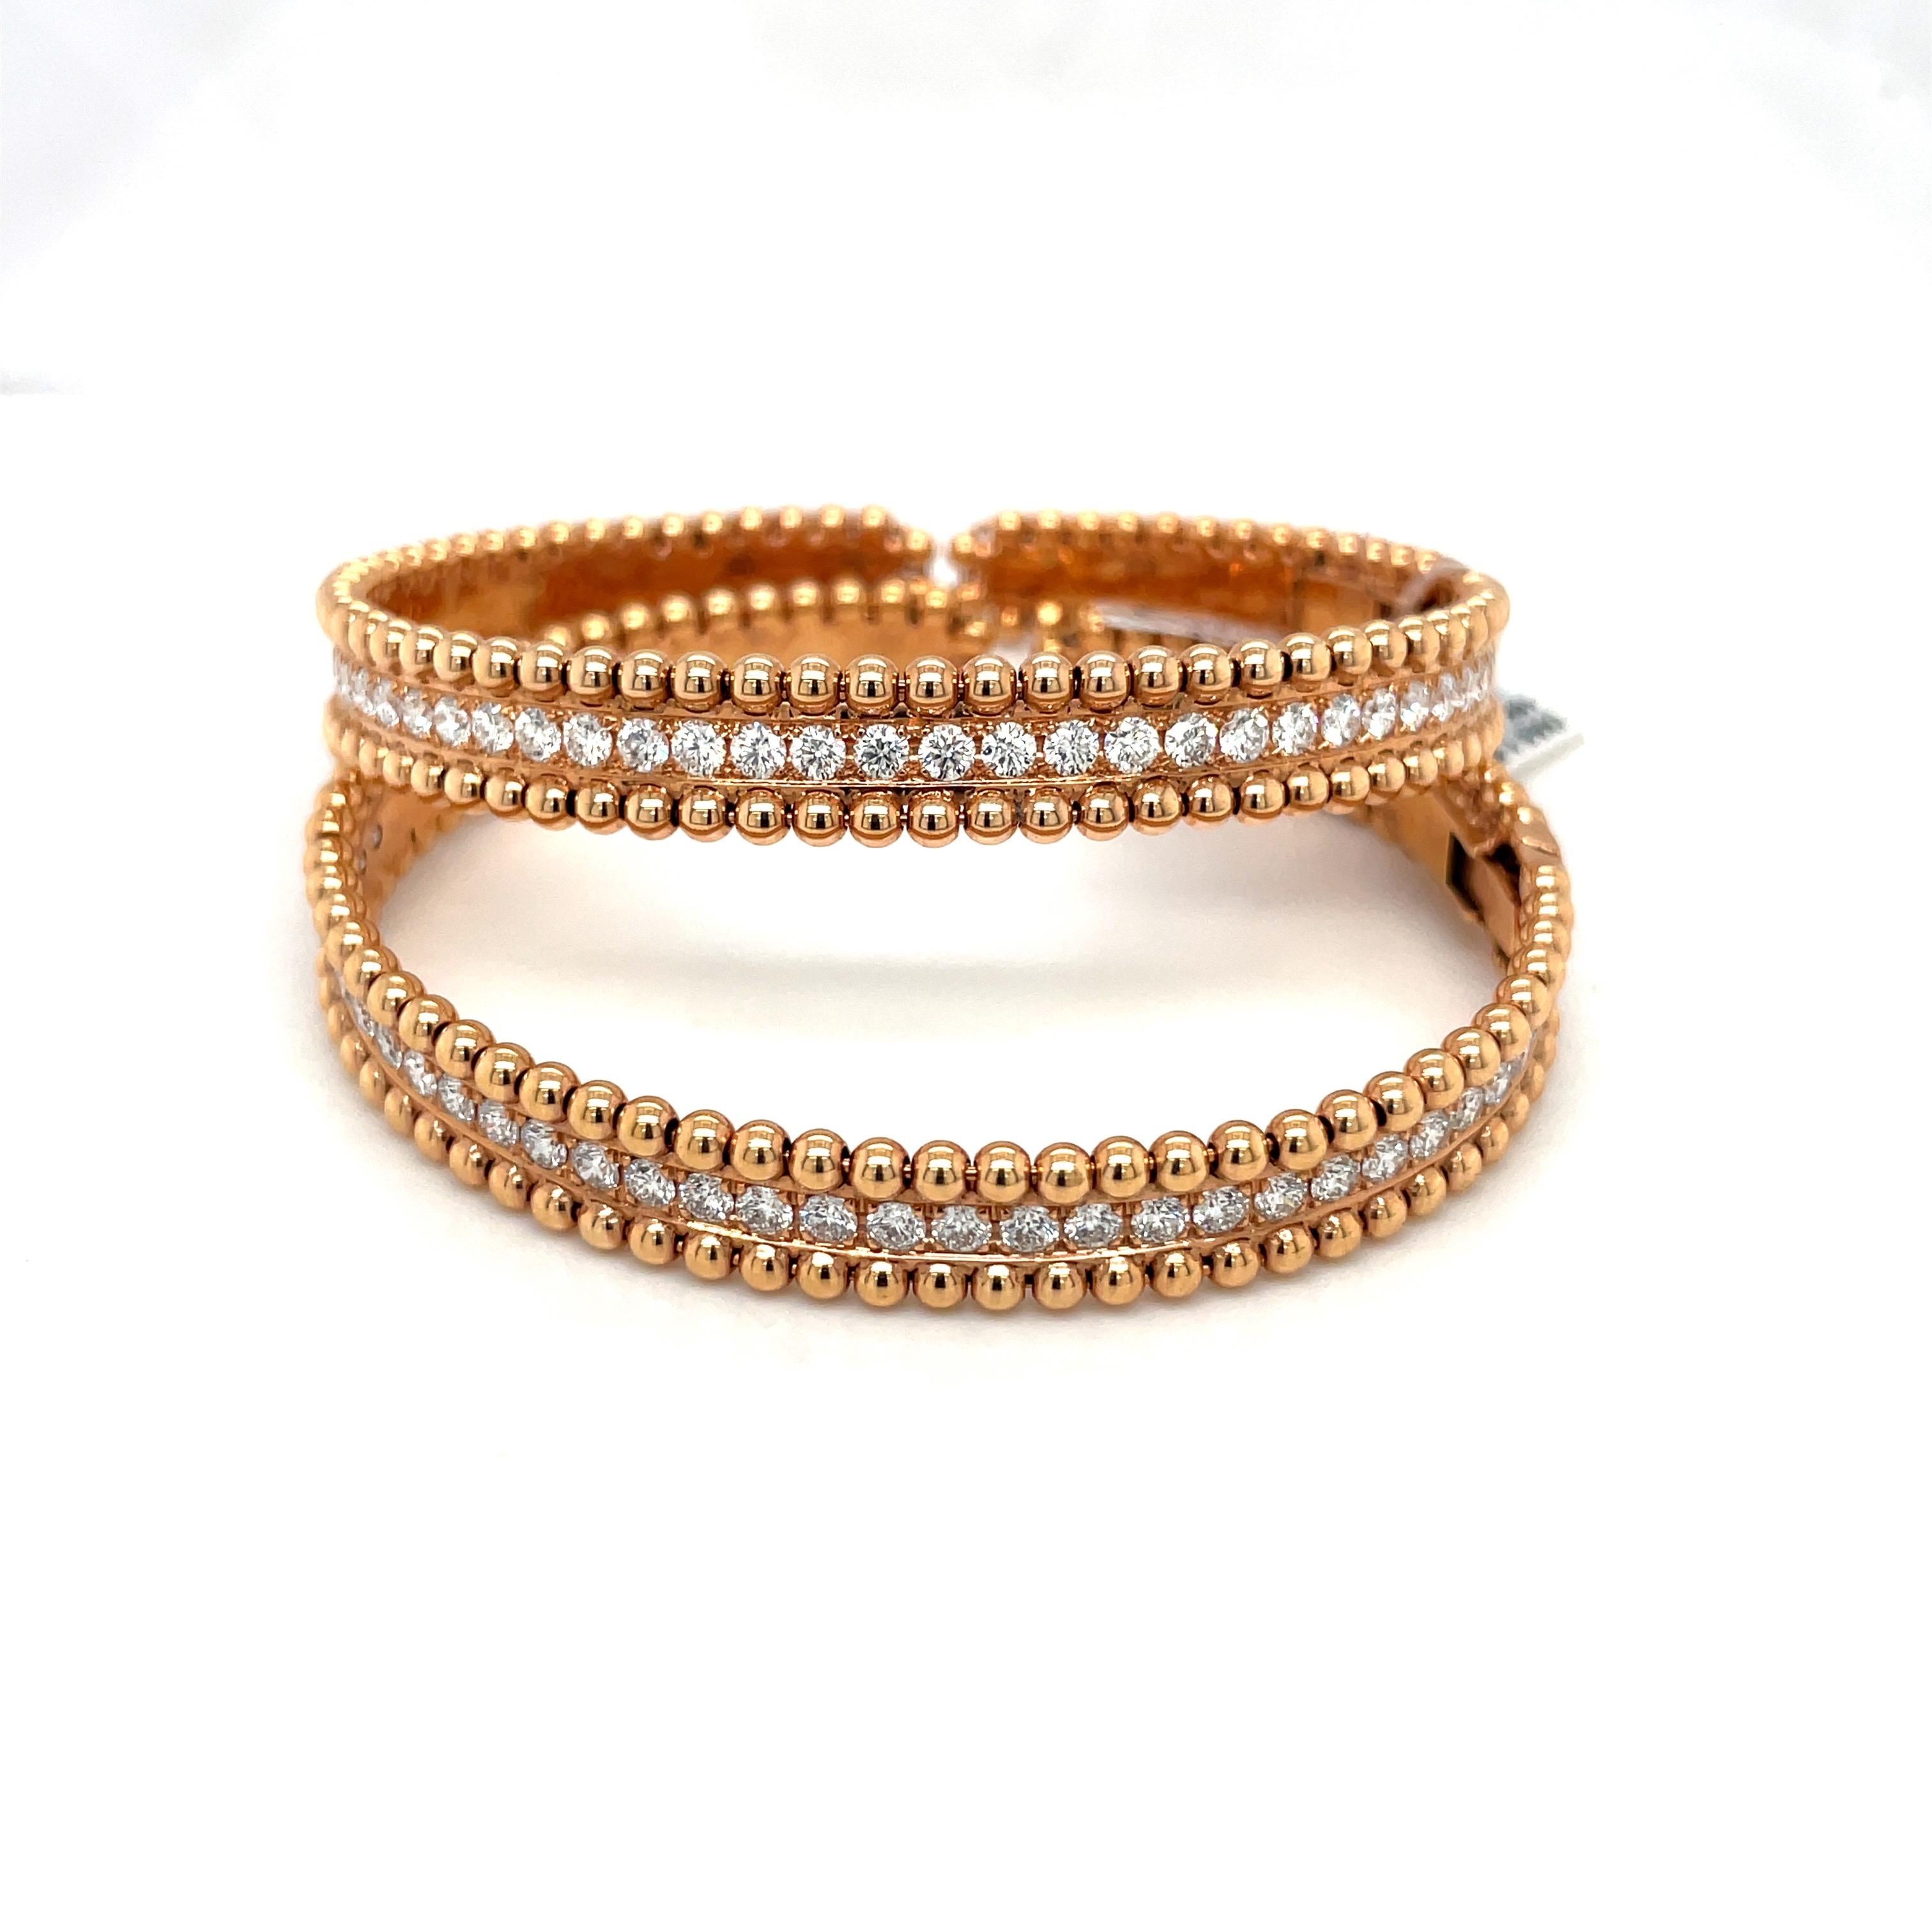 Contemporary 18KT Rose Gold 1.85Ct Diamond Bracelet with Beaded Edge For Sale